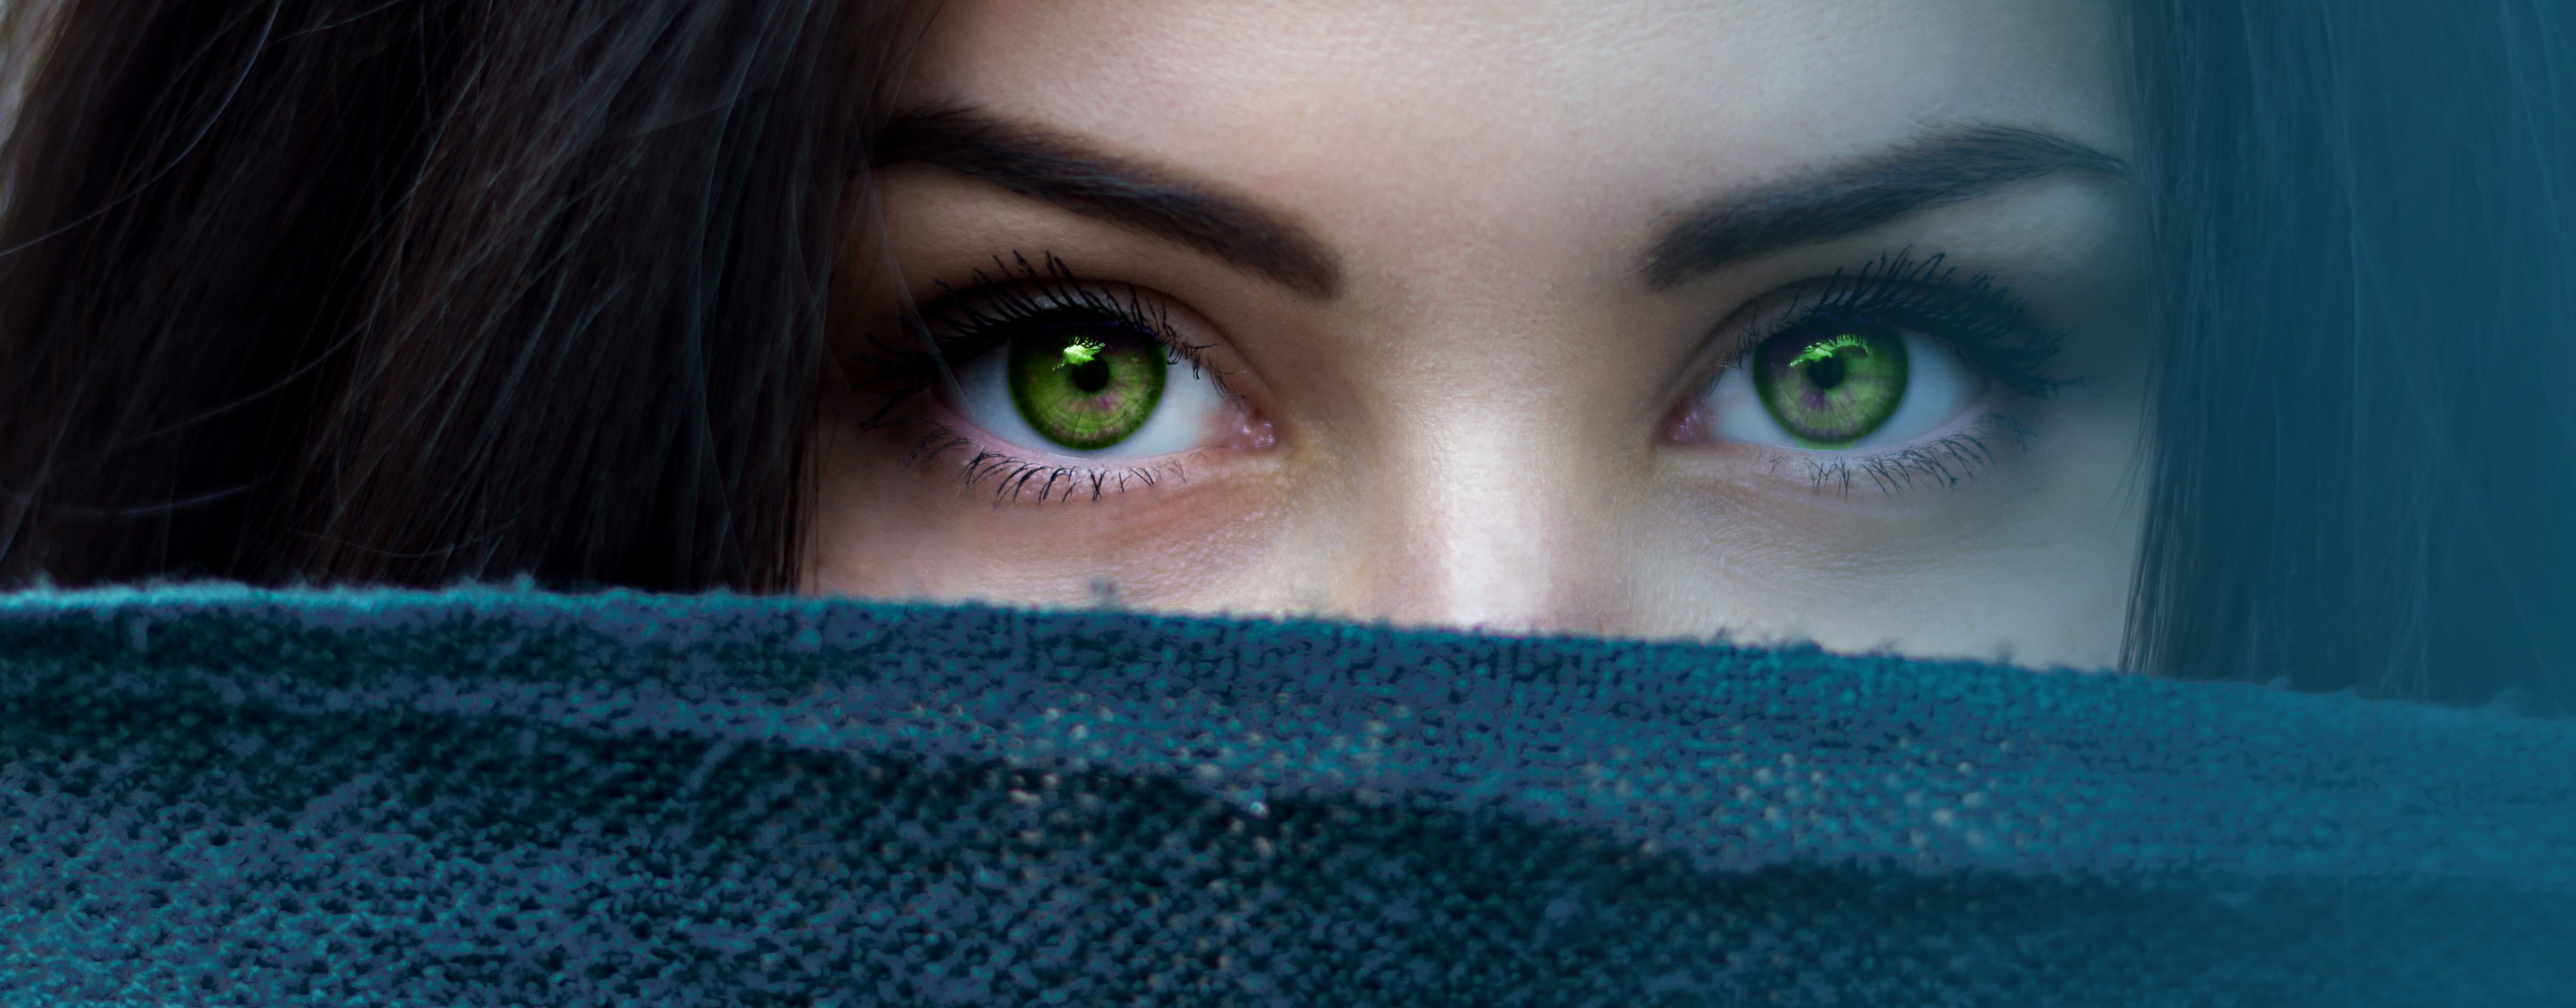 Close up of a woman's eyes